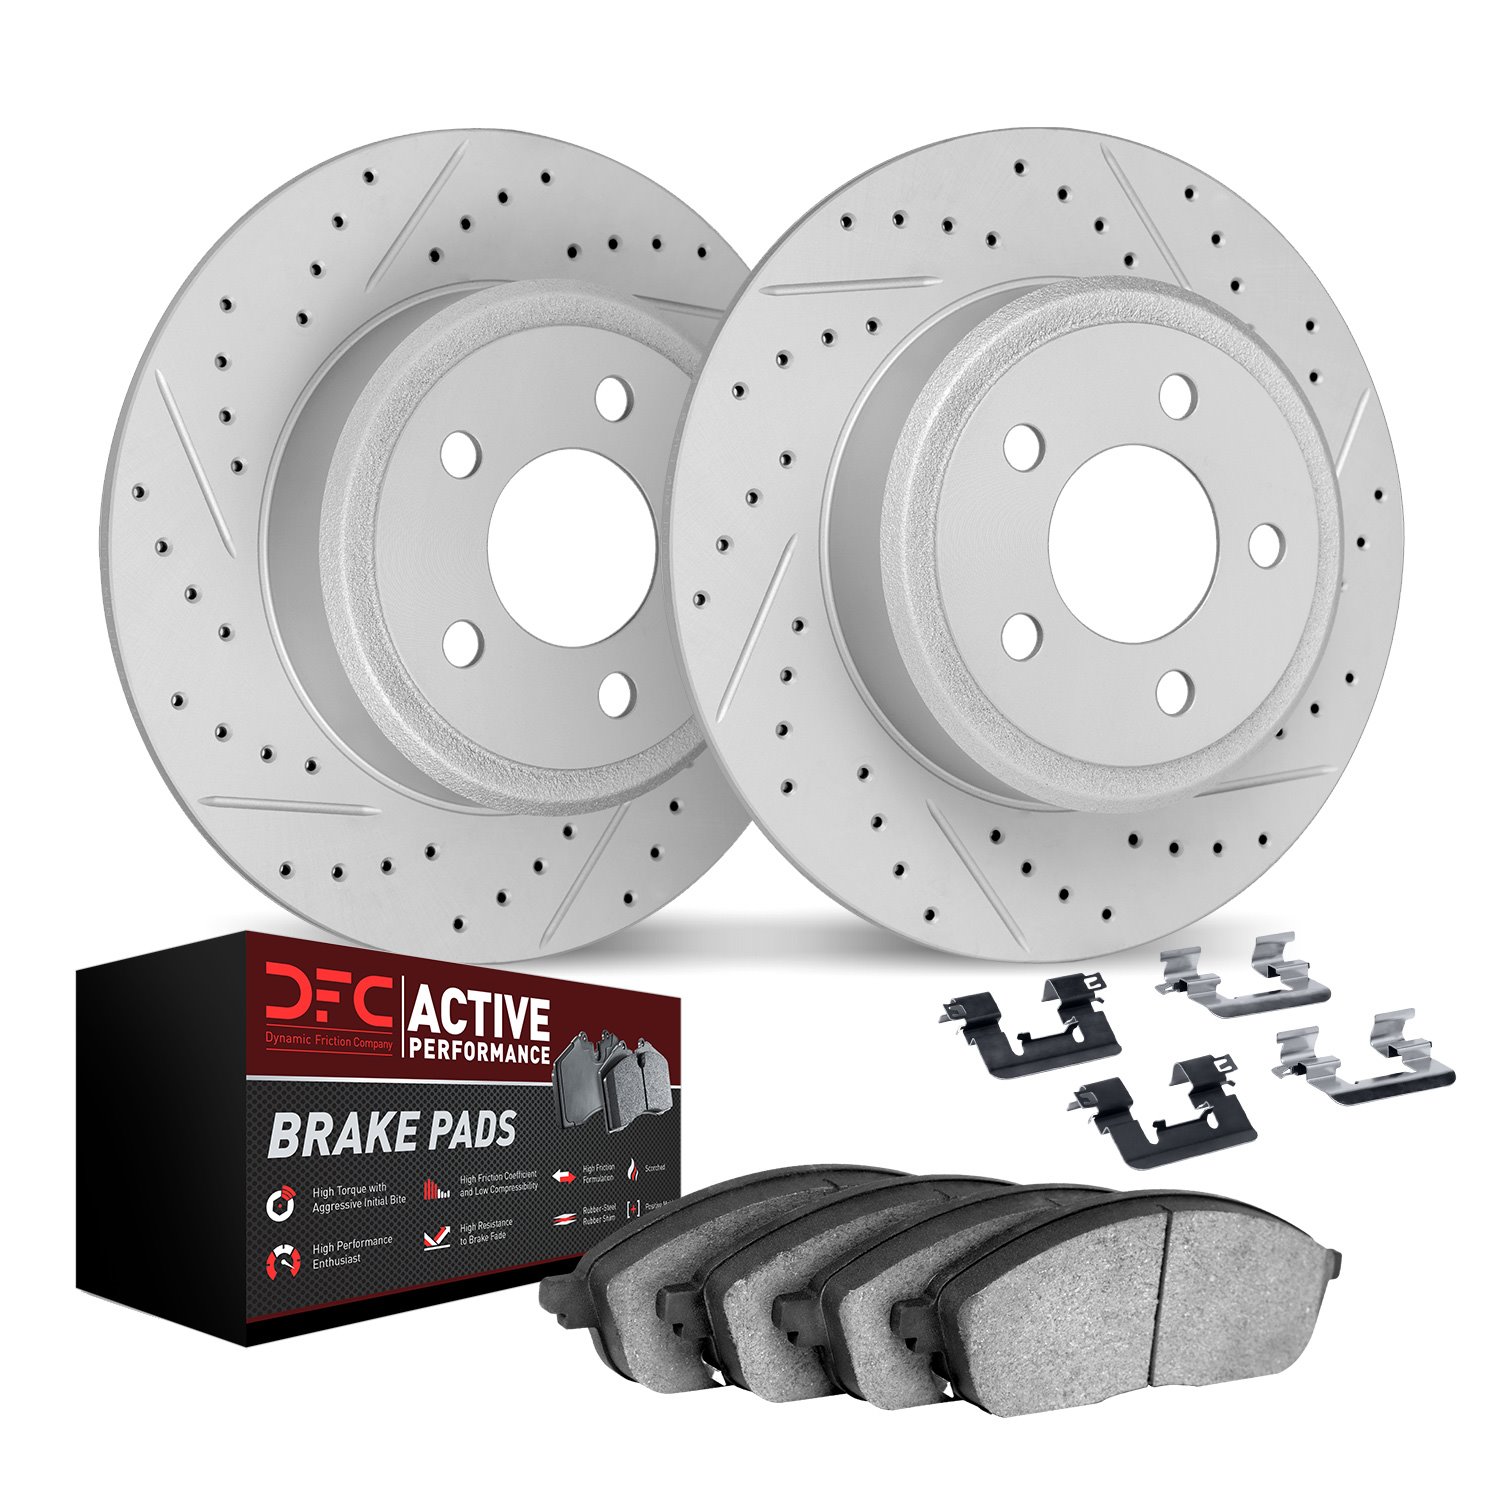 2712-54088 Geoperformance Drilled/Slotted Brake Rotors with Active Performance Pads Kit & Hardware, Fits Select Ford/Lincoln/Mer